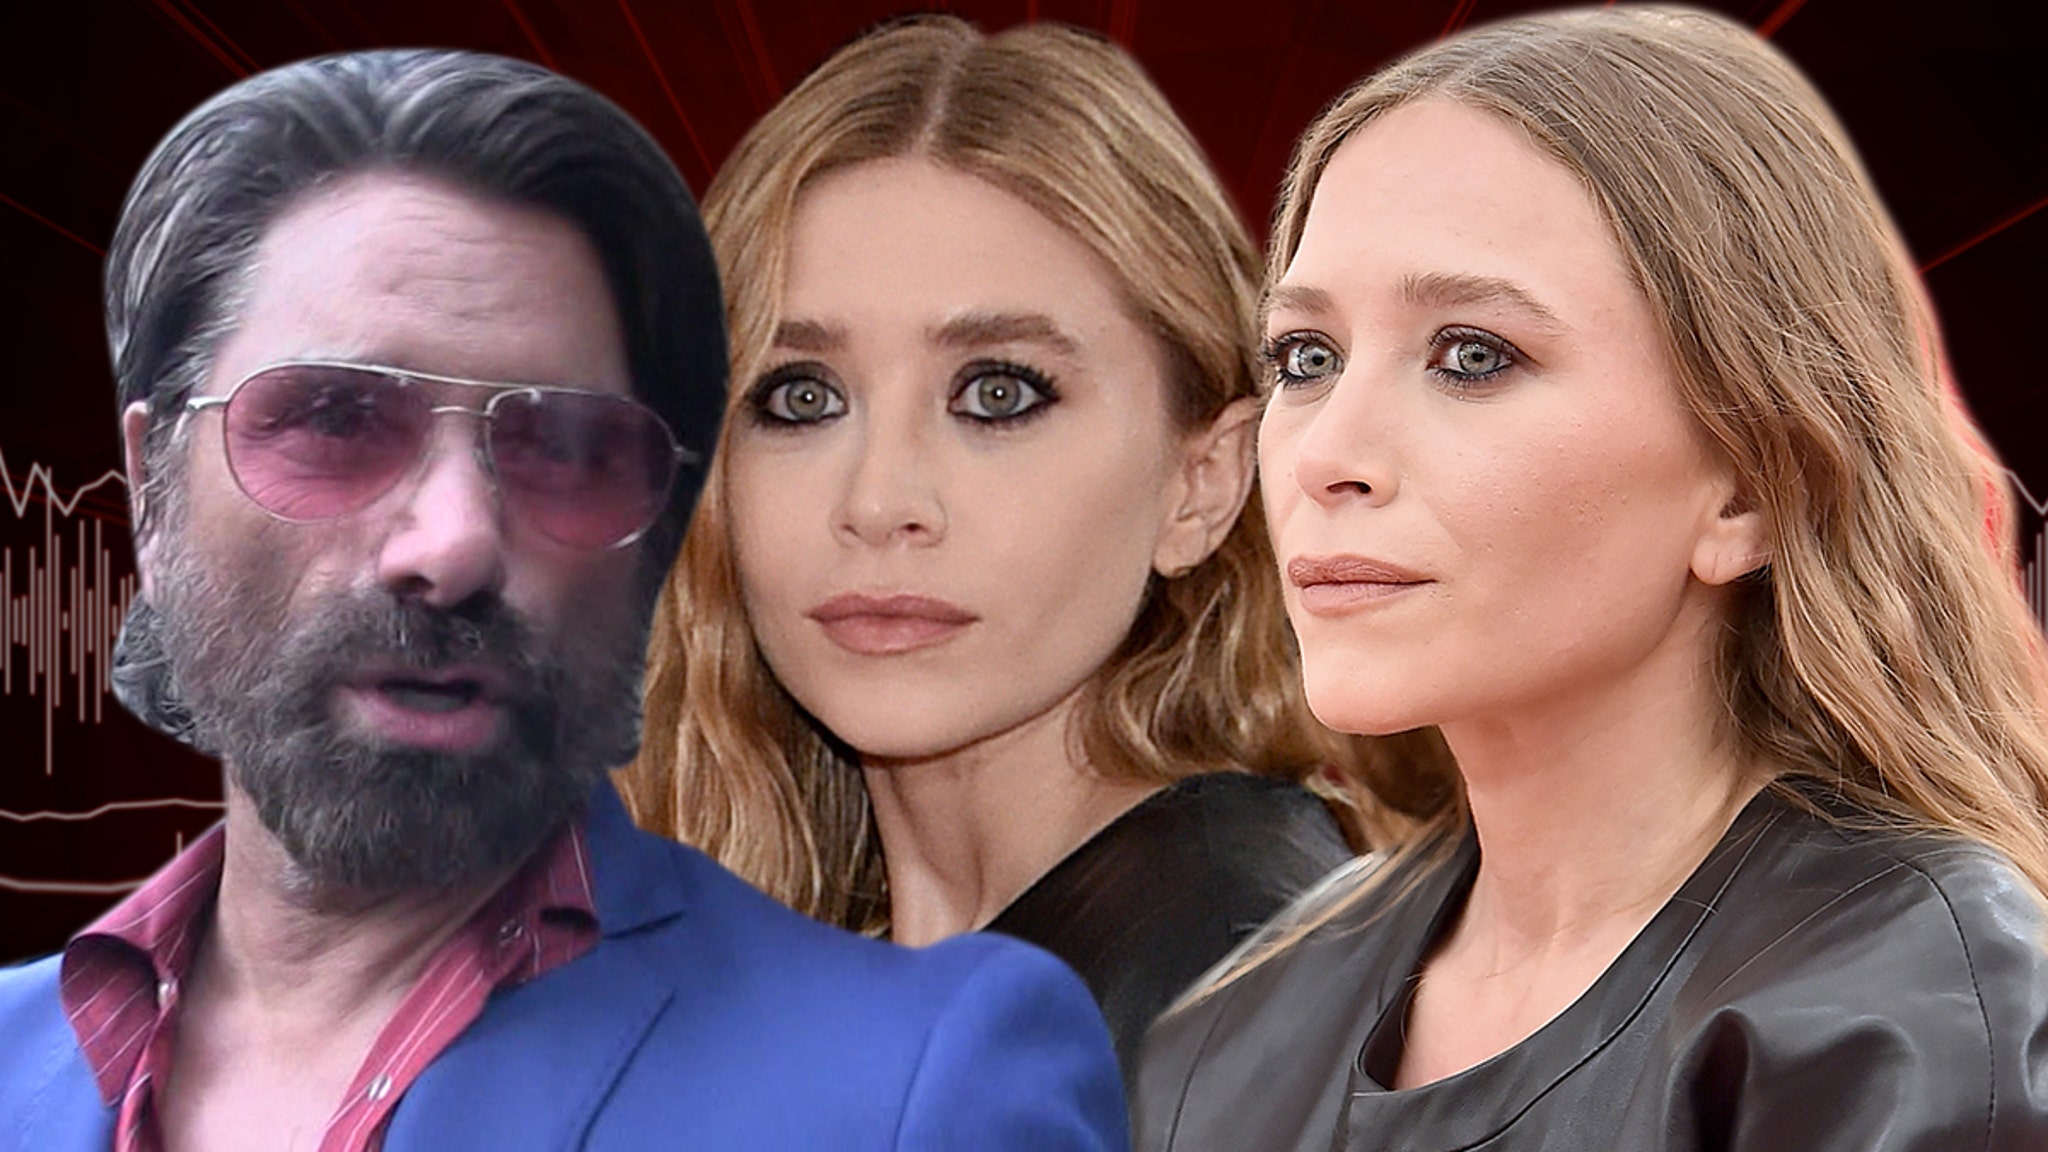 John Stamos was ‘angry’ with the Olsen Twins for leaving ‘Fuller House’